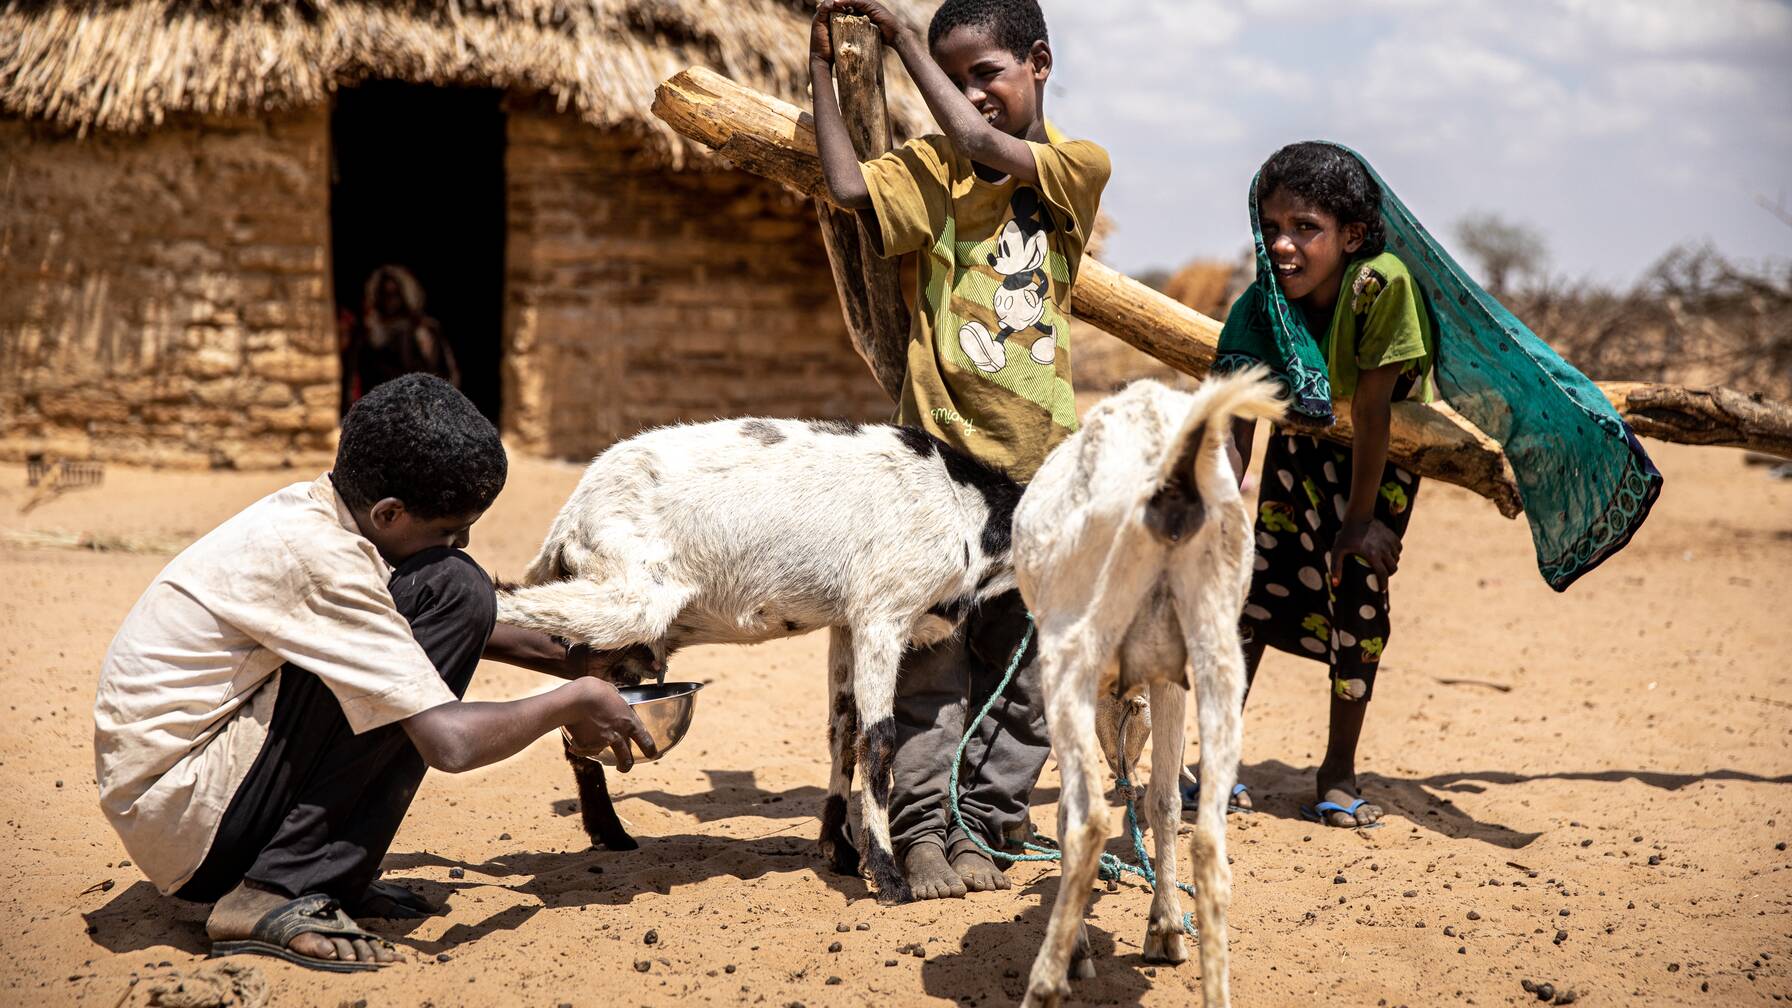 The situation of Bourdjo Albachar and her family is steadily improving thanks to the aid. Caritas is helping the family with emergency financial aid for food and two goats. Thanks to the goats, the family has access to valuable milk again.